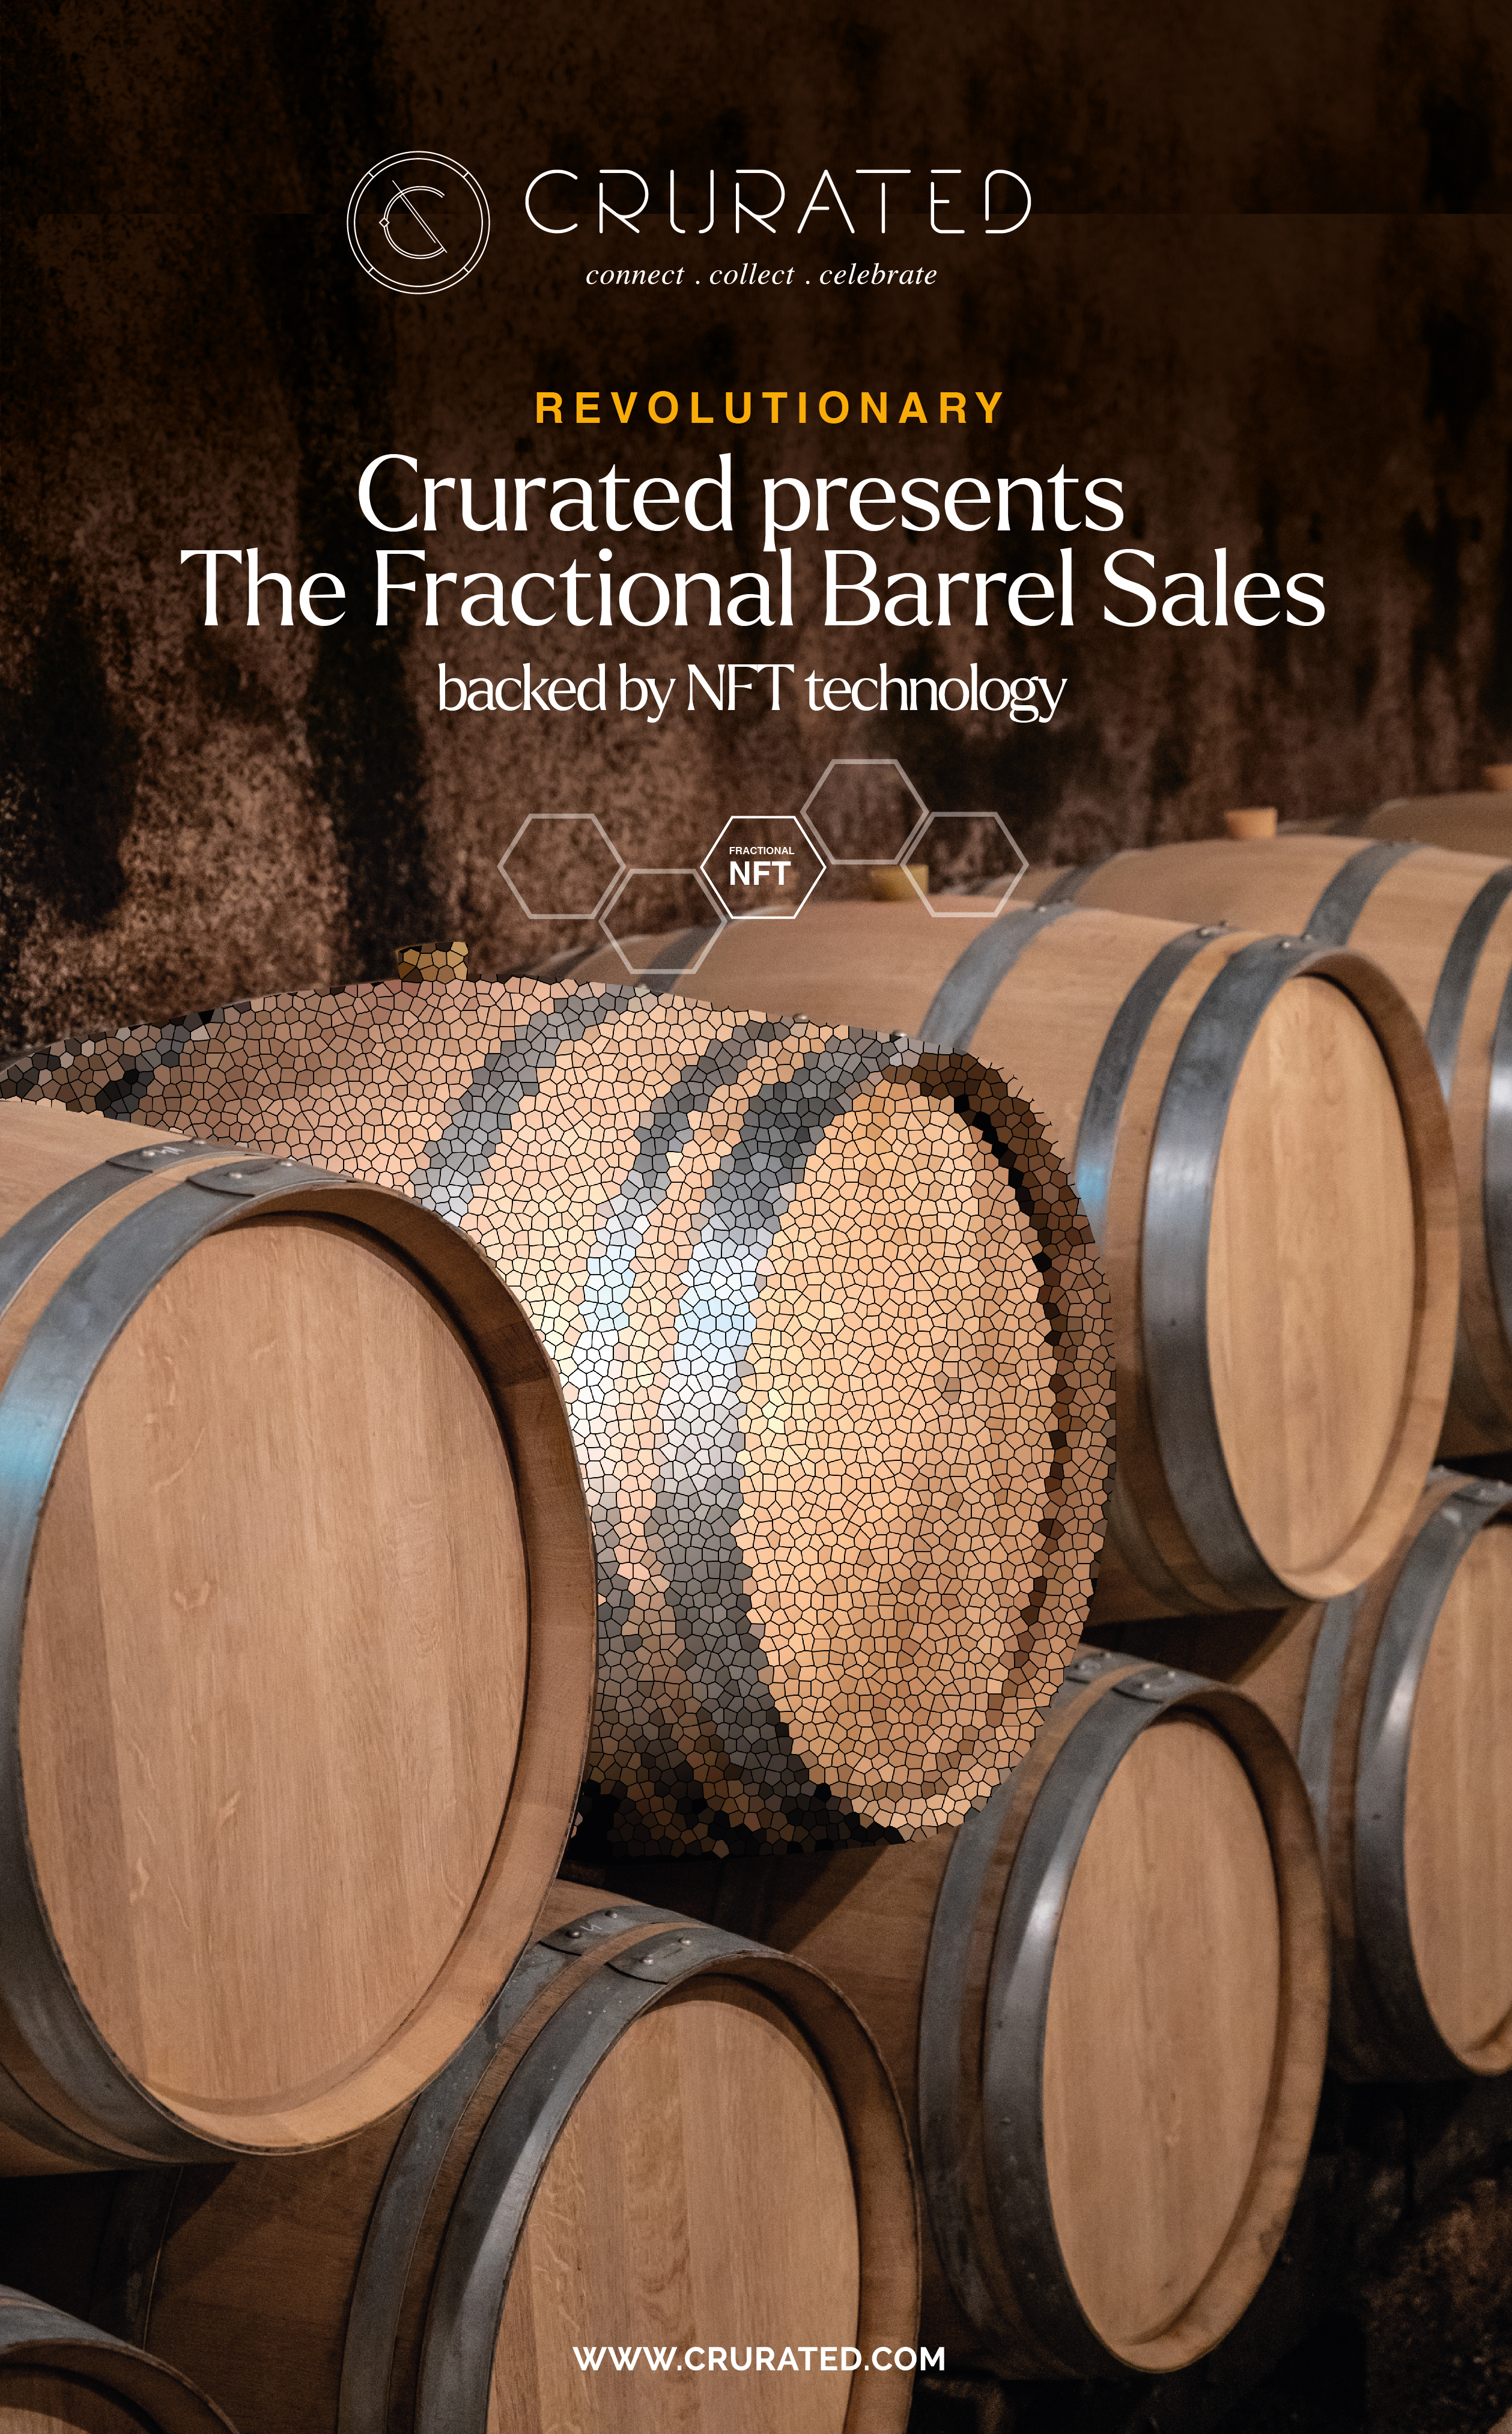 Crurated Presents The Fractional  Barrel Sales Backed by NFT Technology